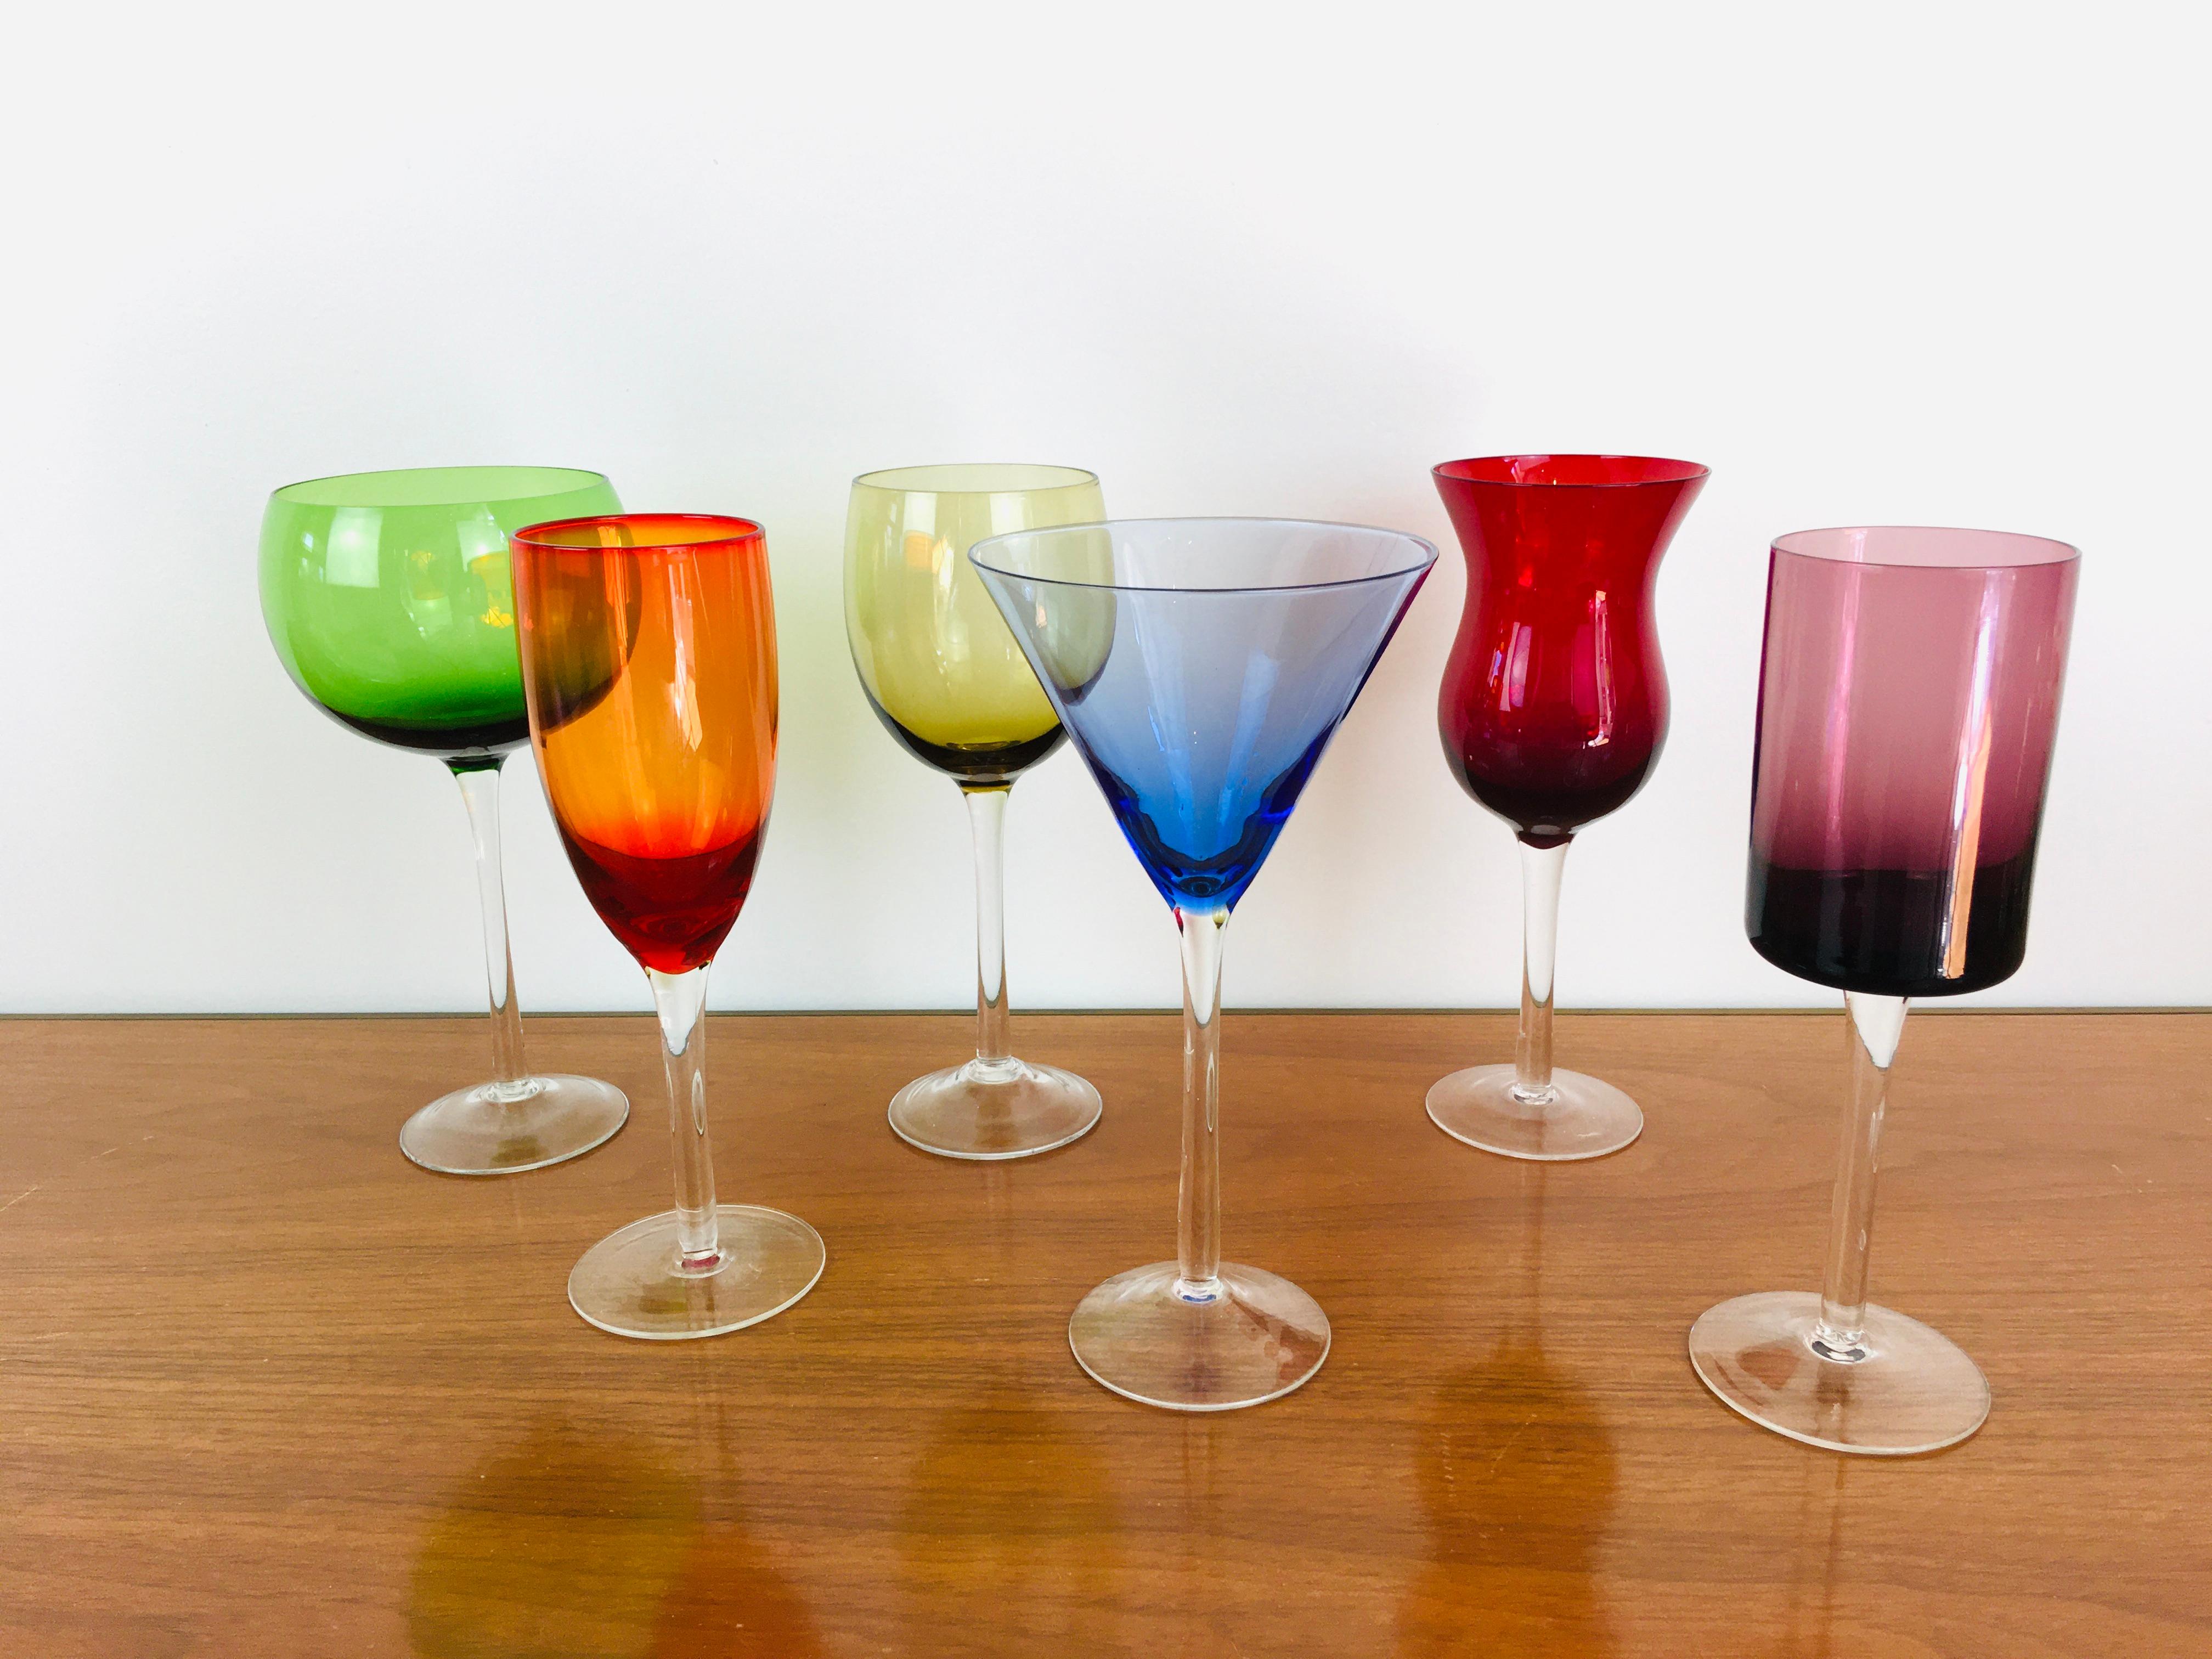 Vintage 1980s Colorful Crystal Mix Match Wine & Cocktail Glasses, Set of 6 In Good Condition For Sale In Las Vegas, NV